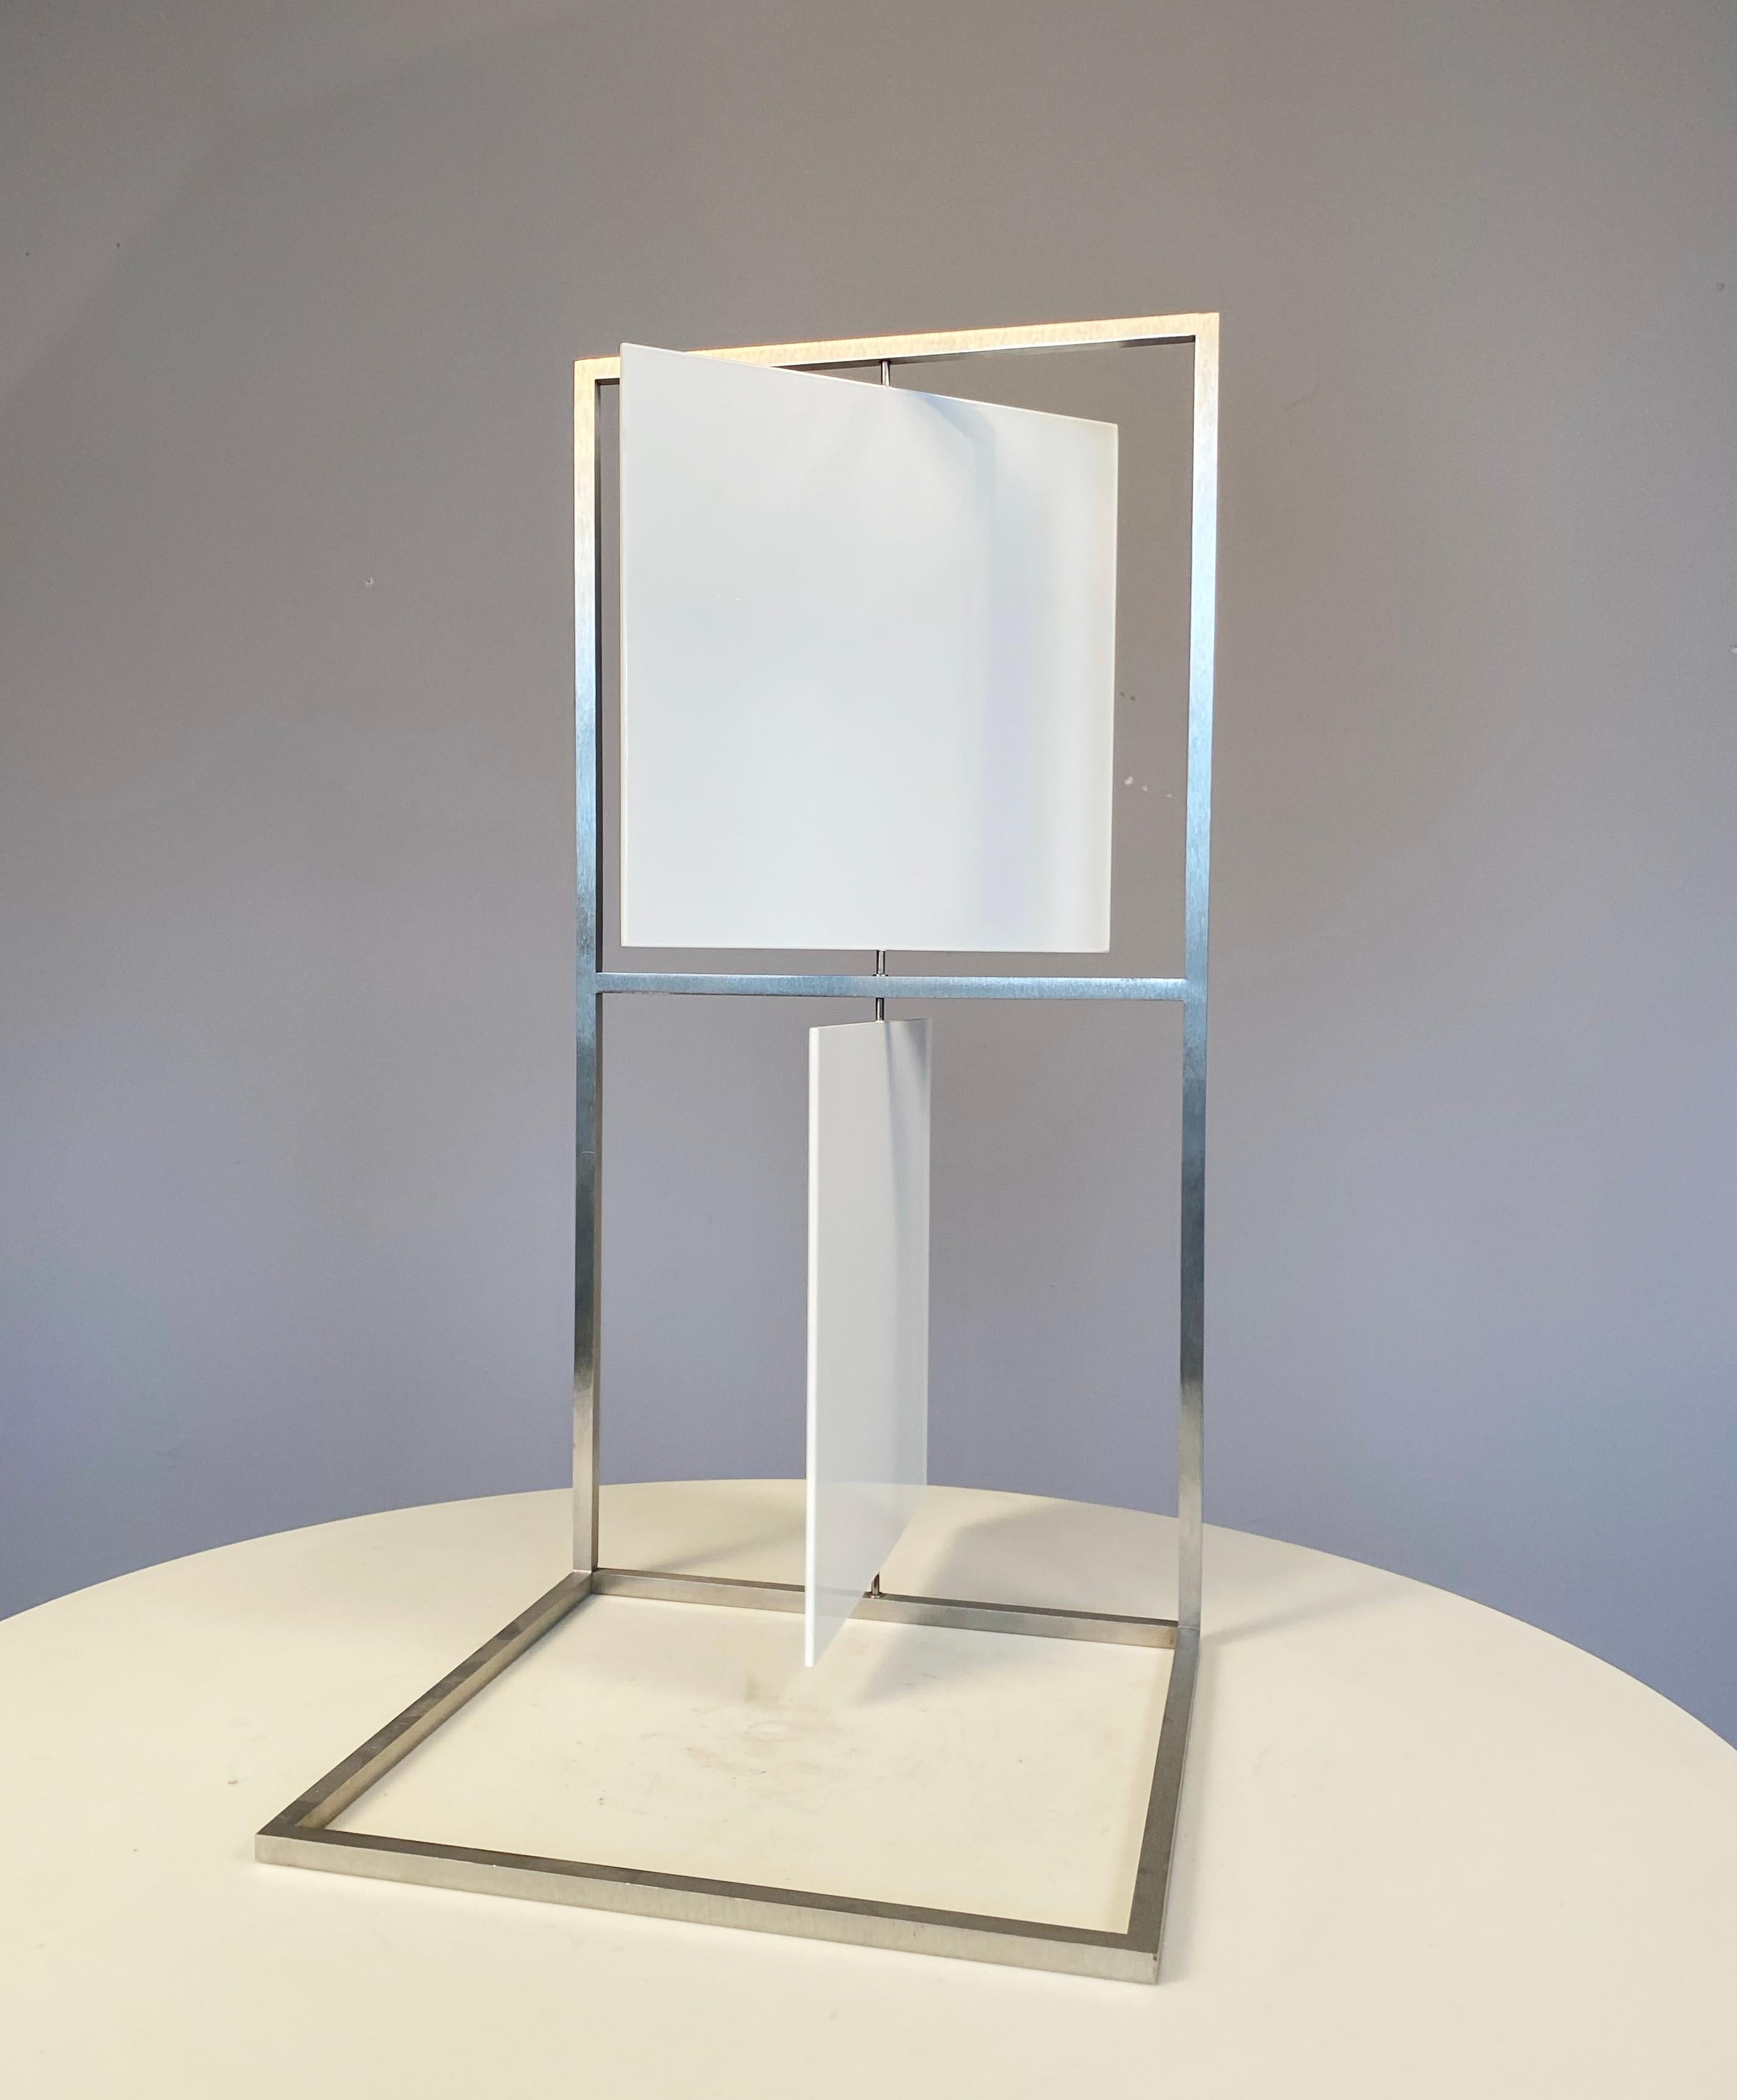 Roger Phillips Abstract Sculpture - Two White Squares Kinetic sculpture